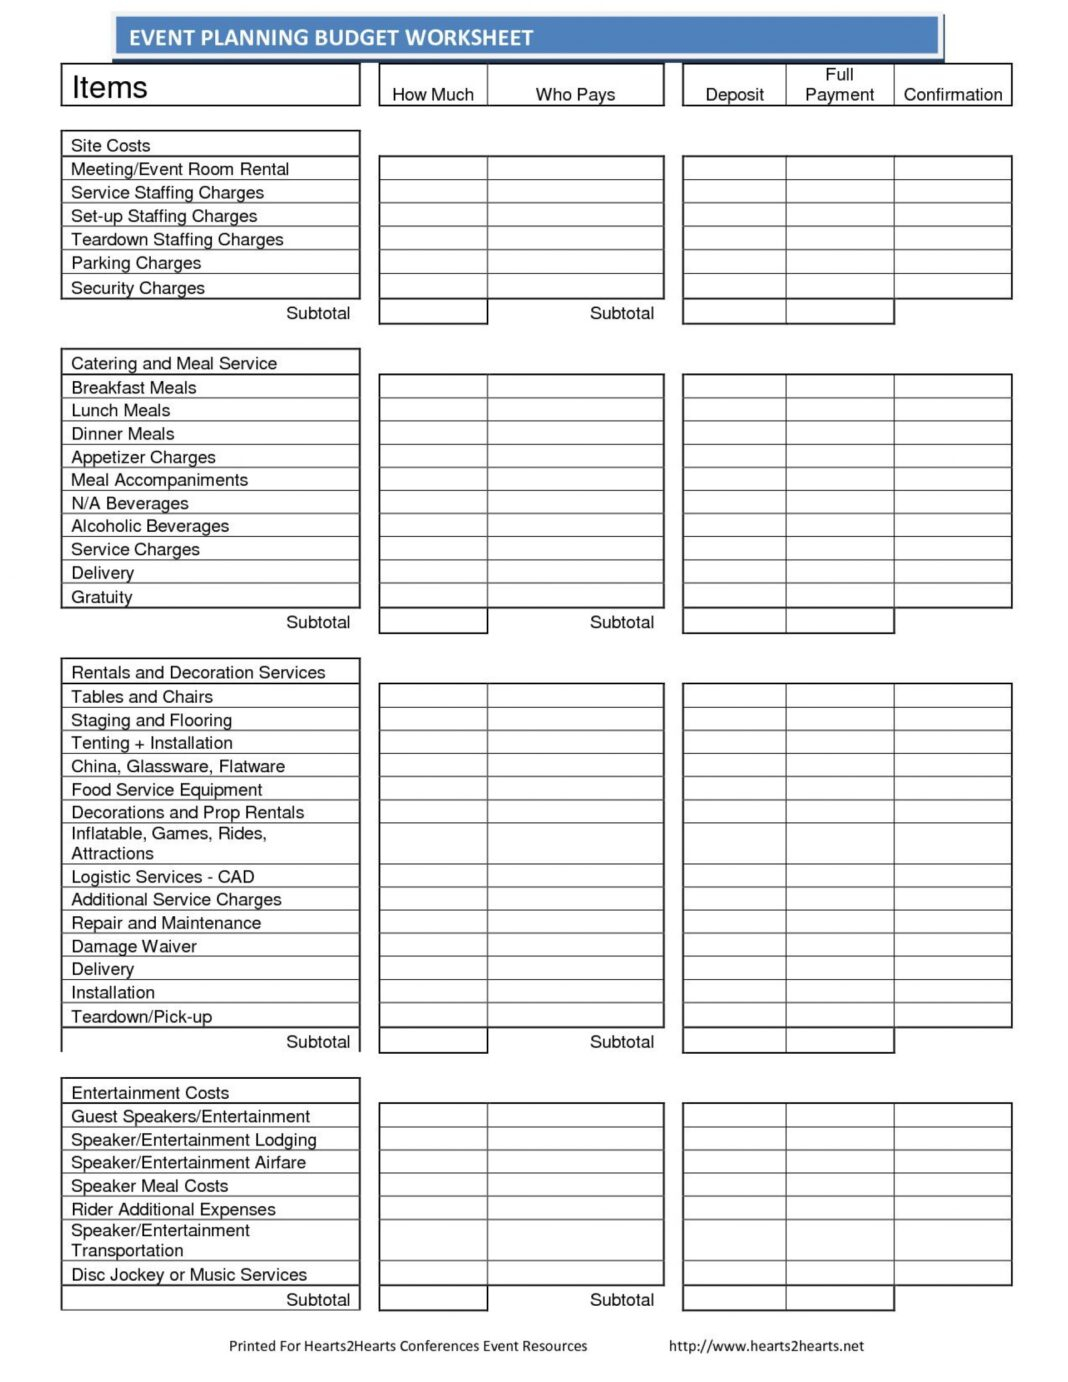 Event Planning Budget Template Addictionary Cost Worksheet  Throughout Budget For Event Planning Template Pertaining To Budget For Event Planning Template